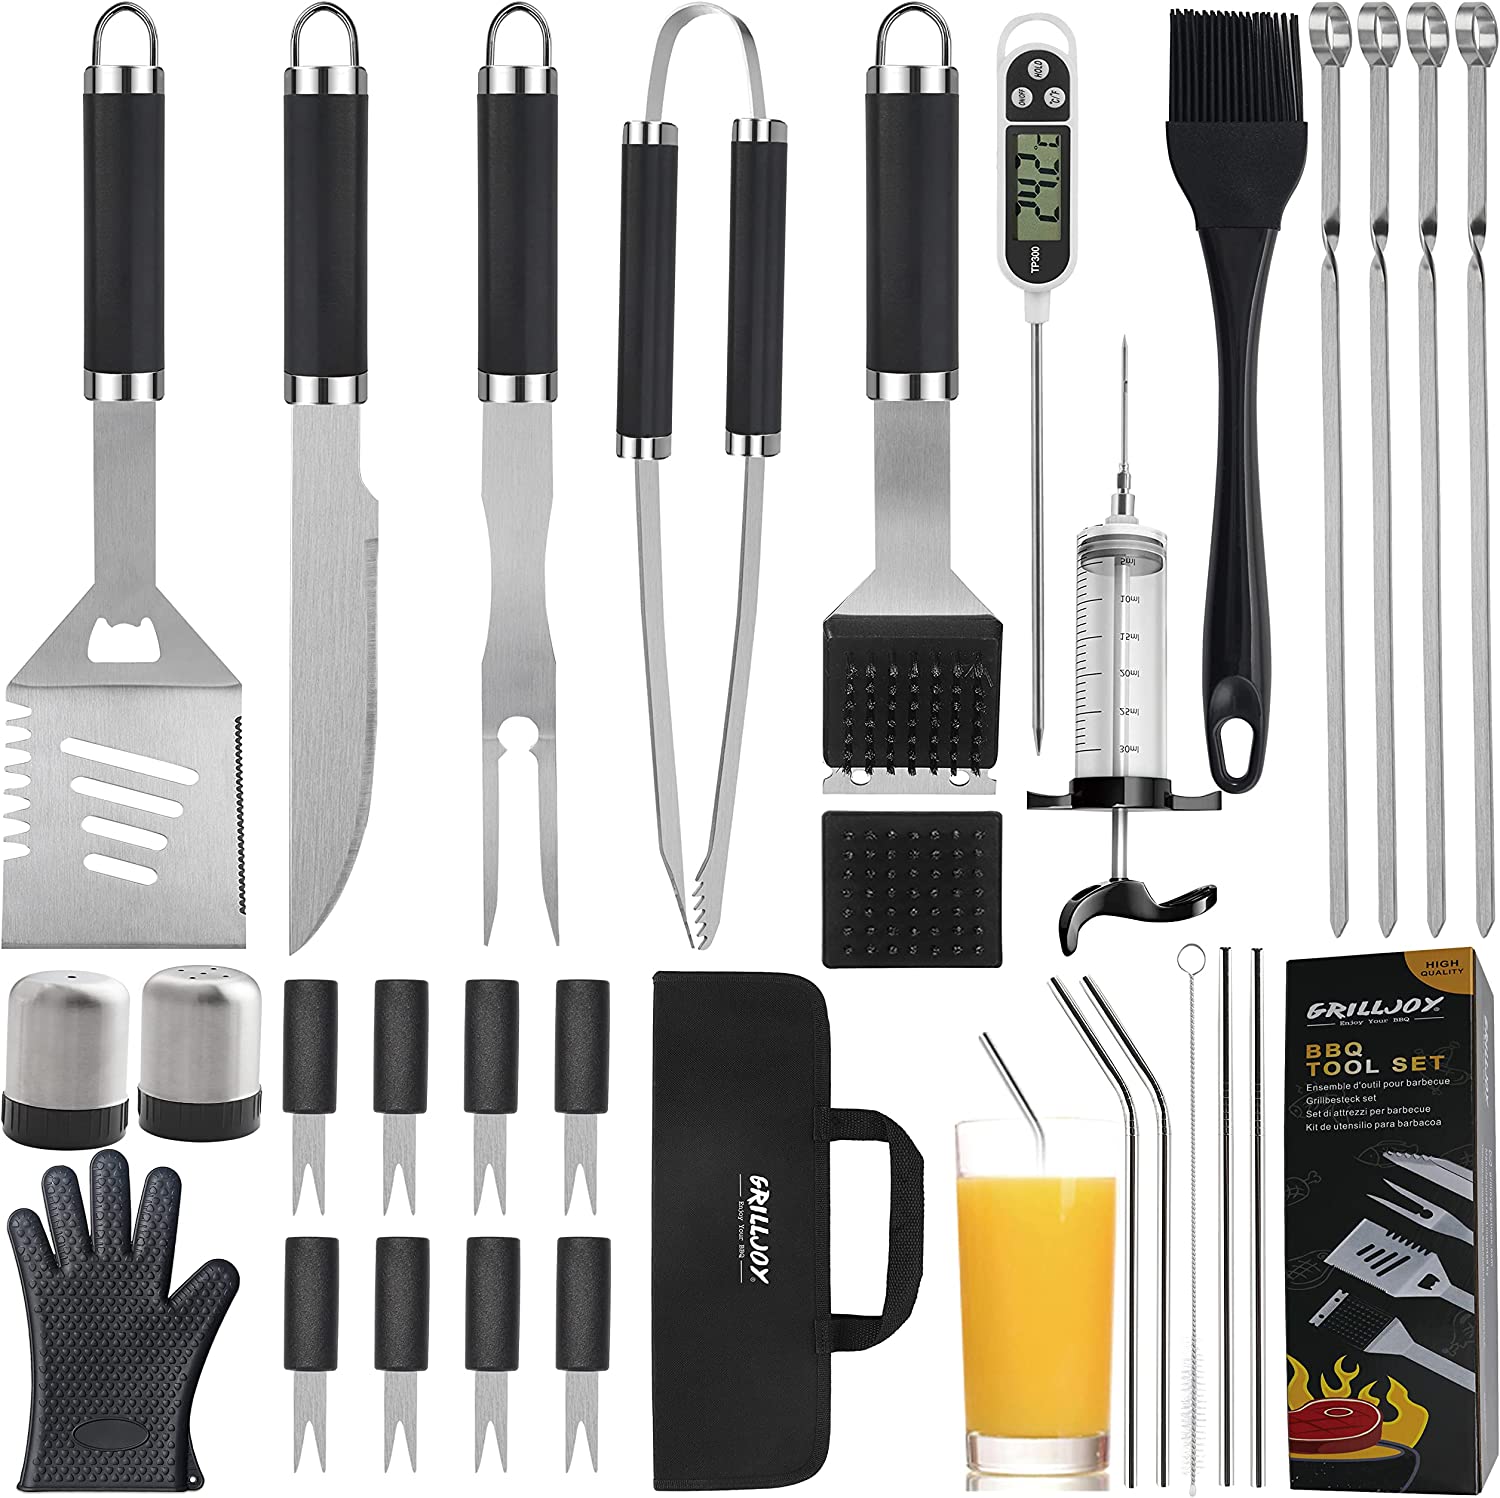 https://www.dontwasteyourmoney.com/wp-content/uploads/2023/03/grilljoy-easy-store-bag-dishwasher-safe-barbecue-tool-set-30-piece-barbecue-tool-set.jpg